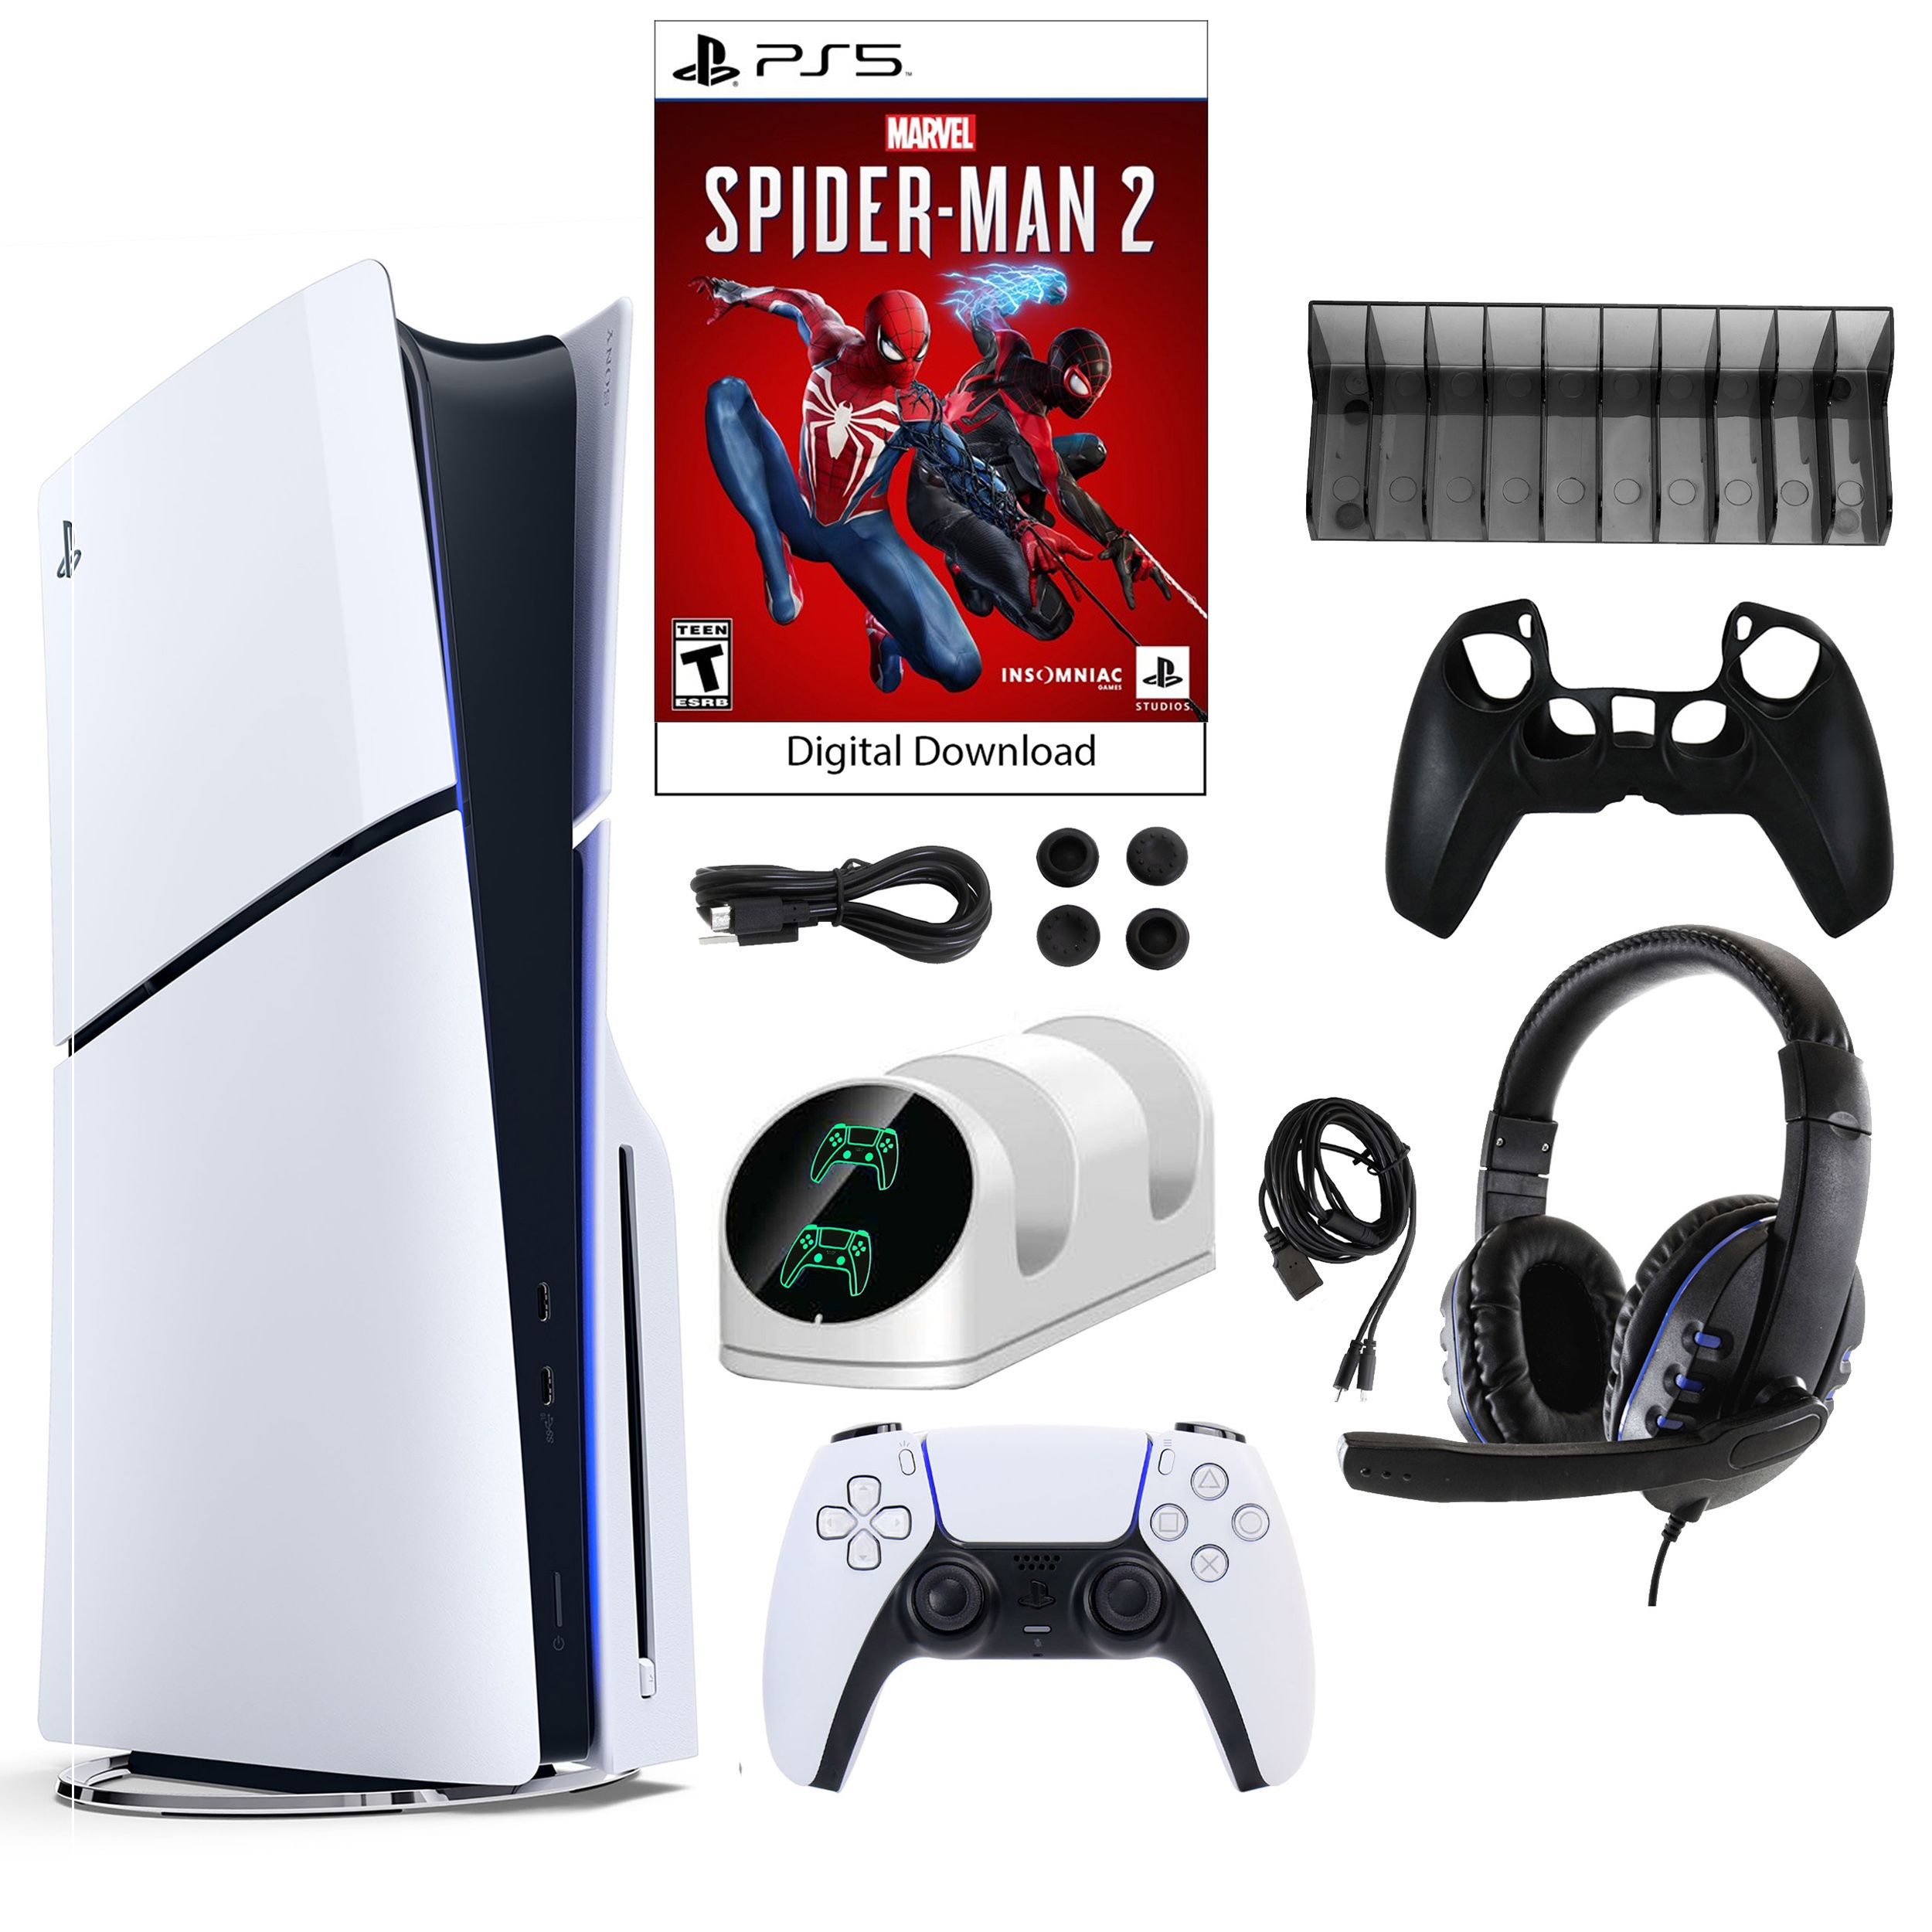 Fingerhut - Sony PlayStation 5 Spider Man 2 Slim Disc Console with  Accessories Kit